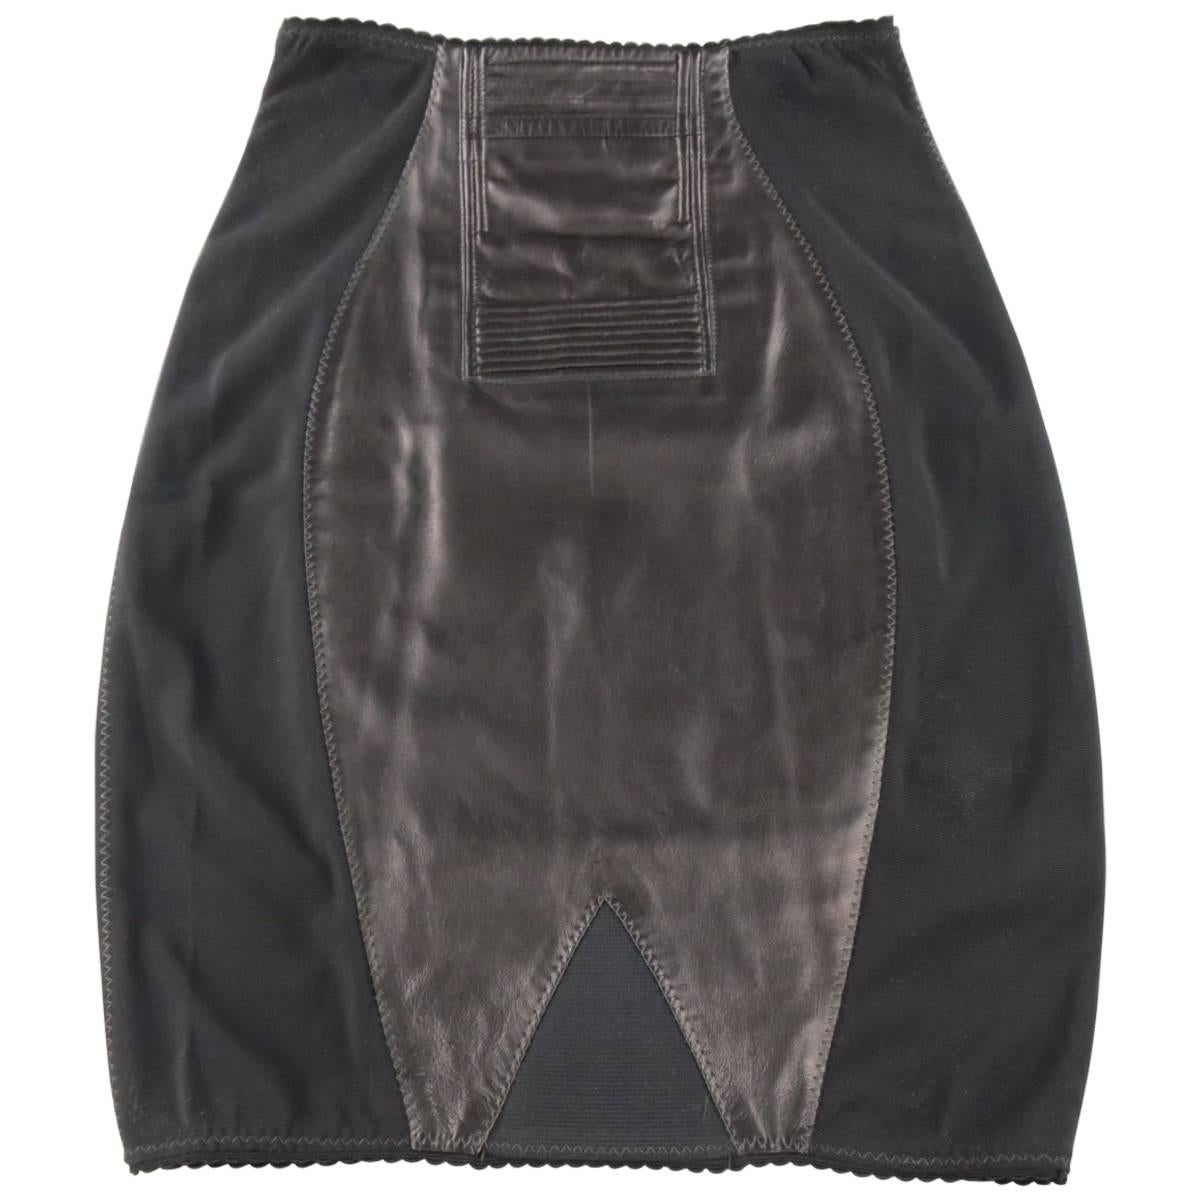 Jean Paul Gaultier Black Leather and Mesh Panel Girdle Pencil Skirt